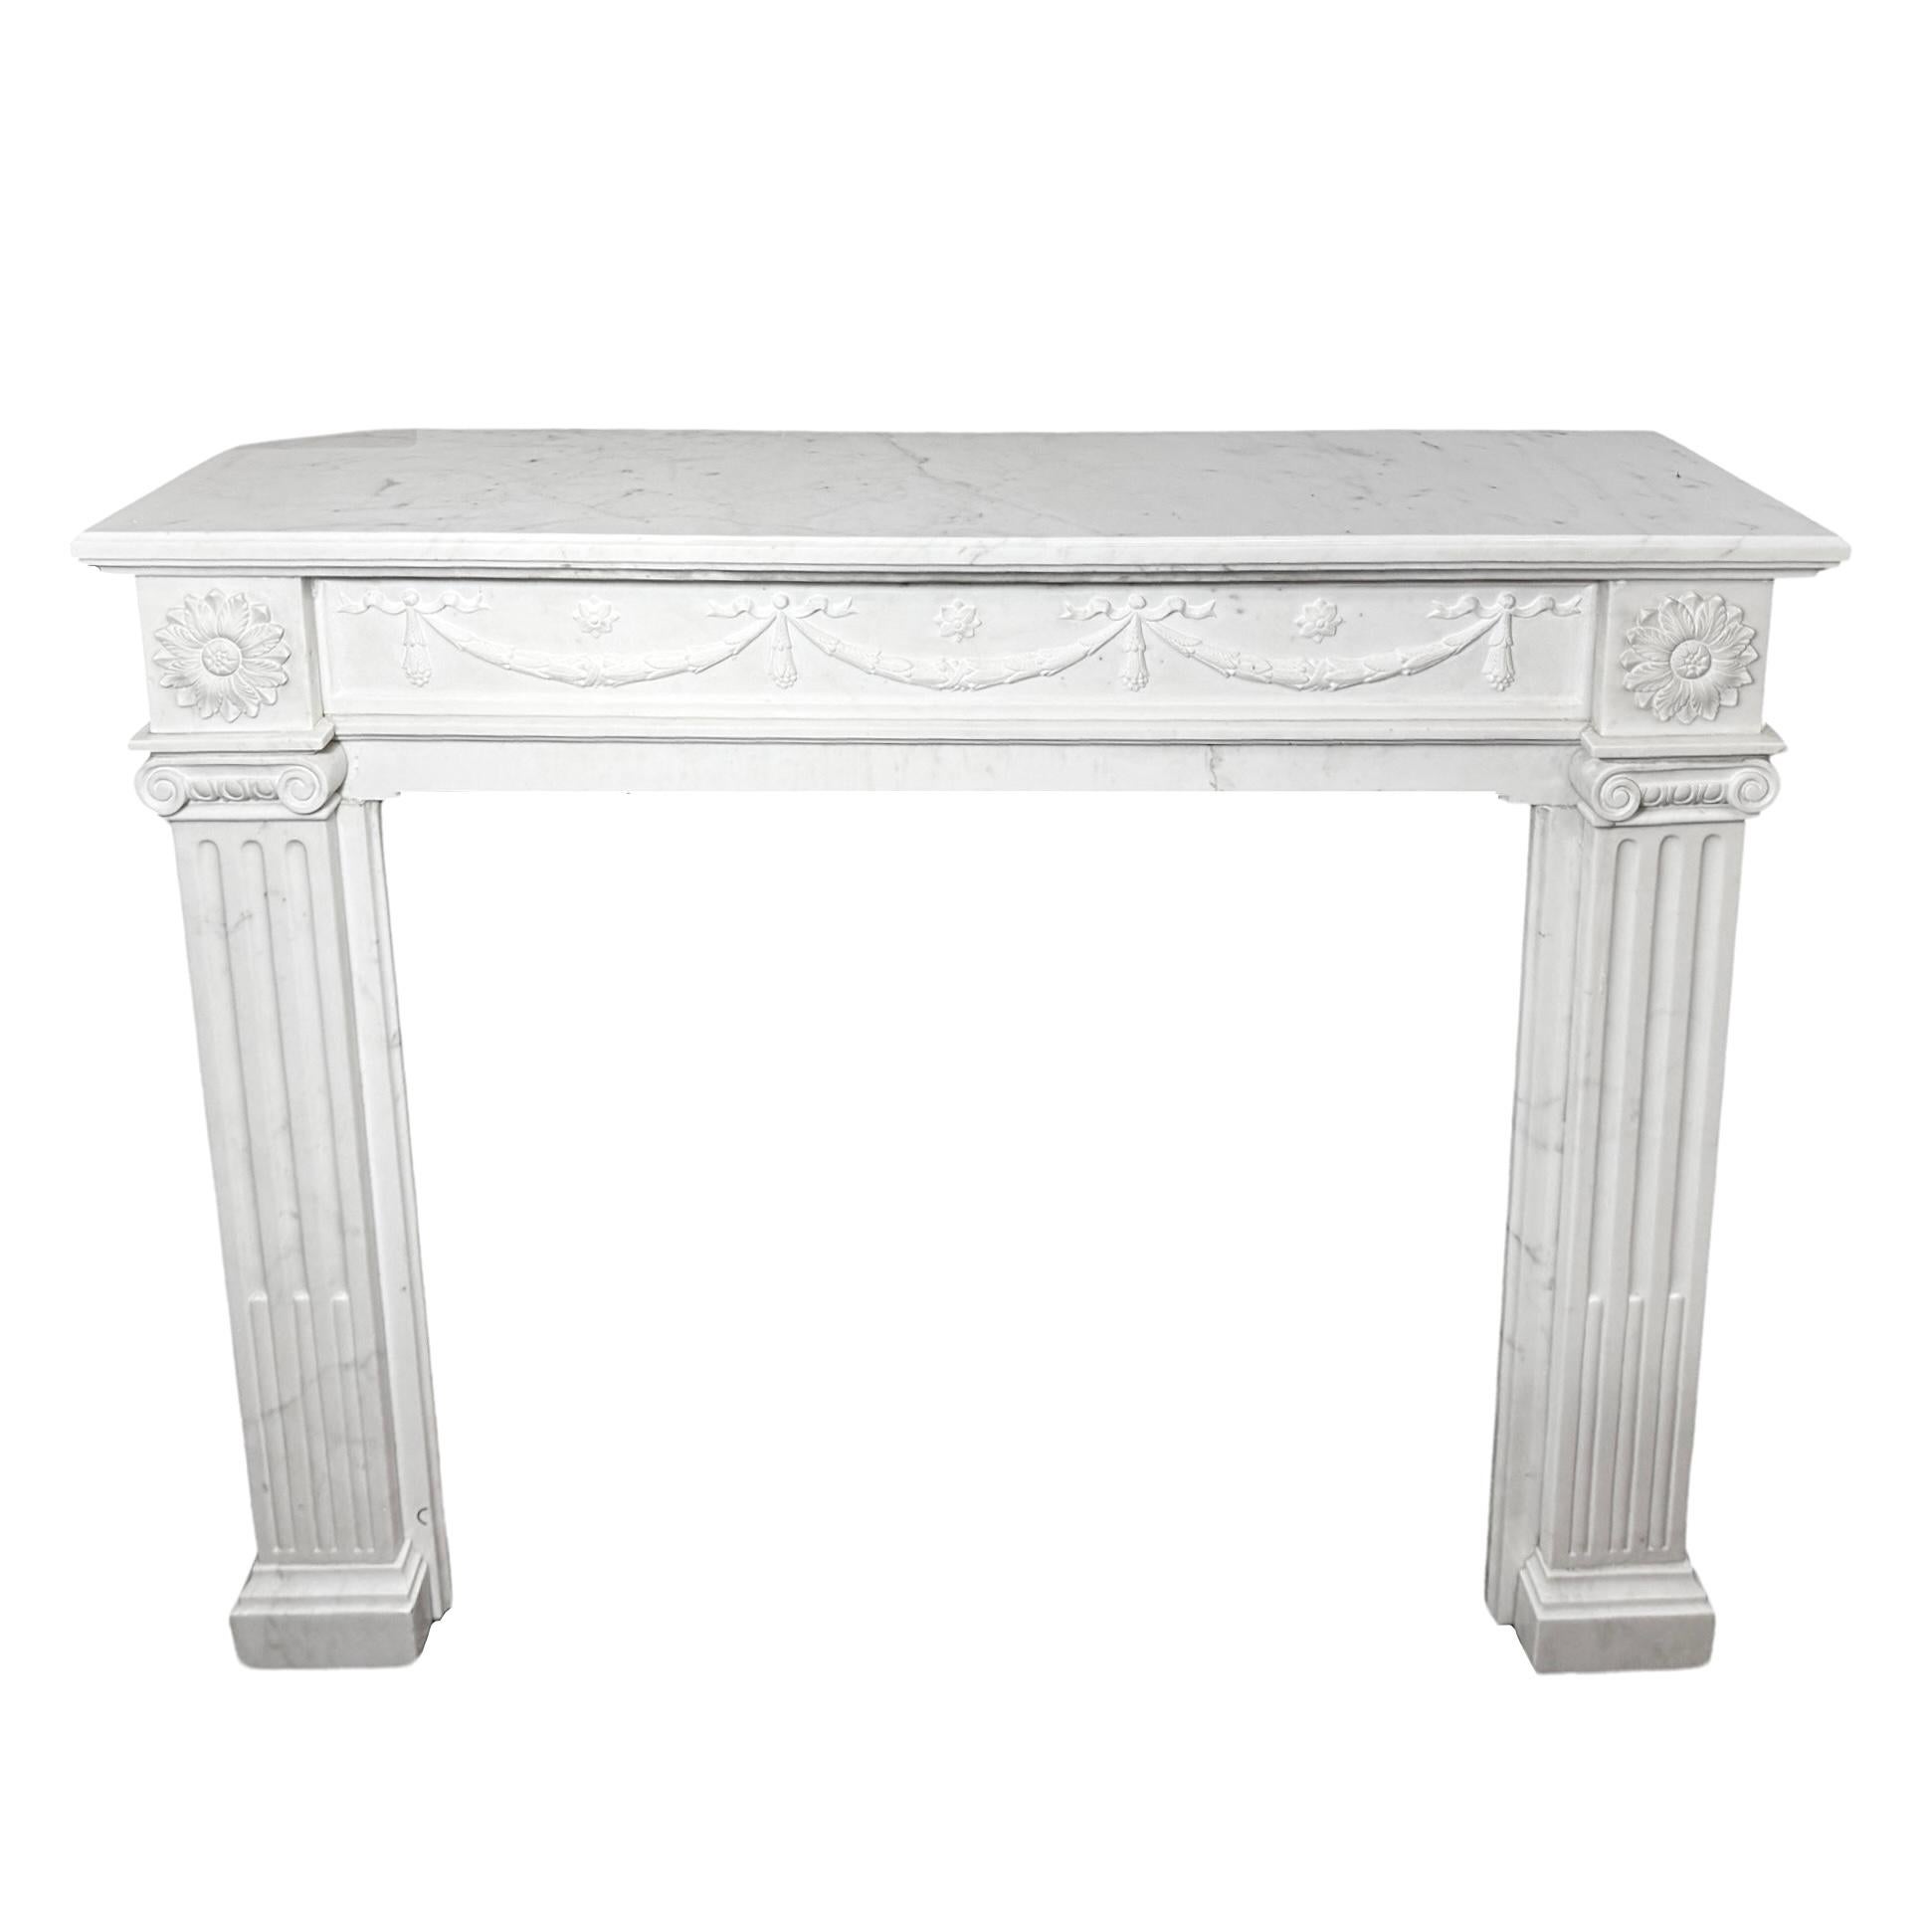 This French White Veined Carrara Marble Mantel is a beautiful and timeless addition to any home. Made of high-quality white veined Carrara marble from France and designed in the luxurious Louis XVI style, it features exquisite carvings that add an